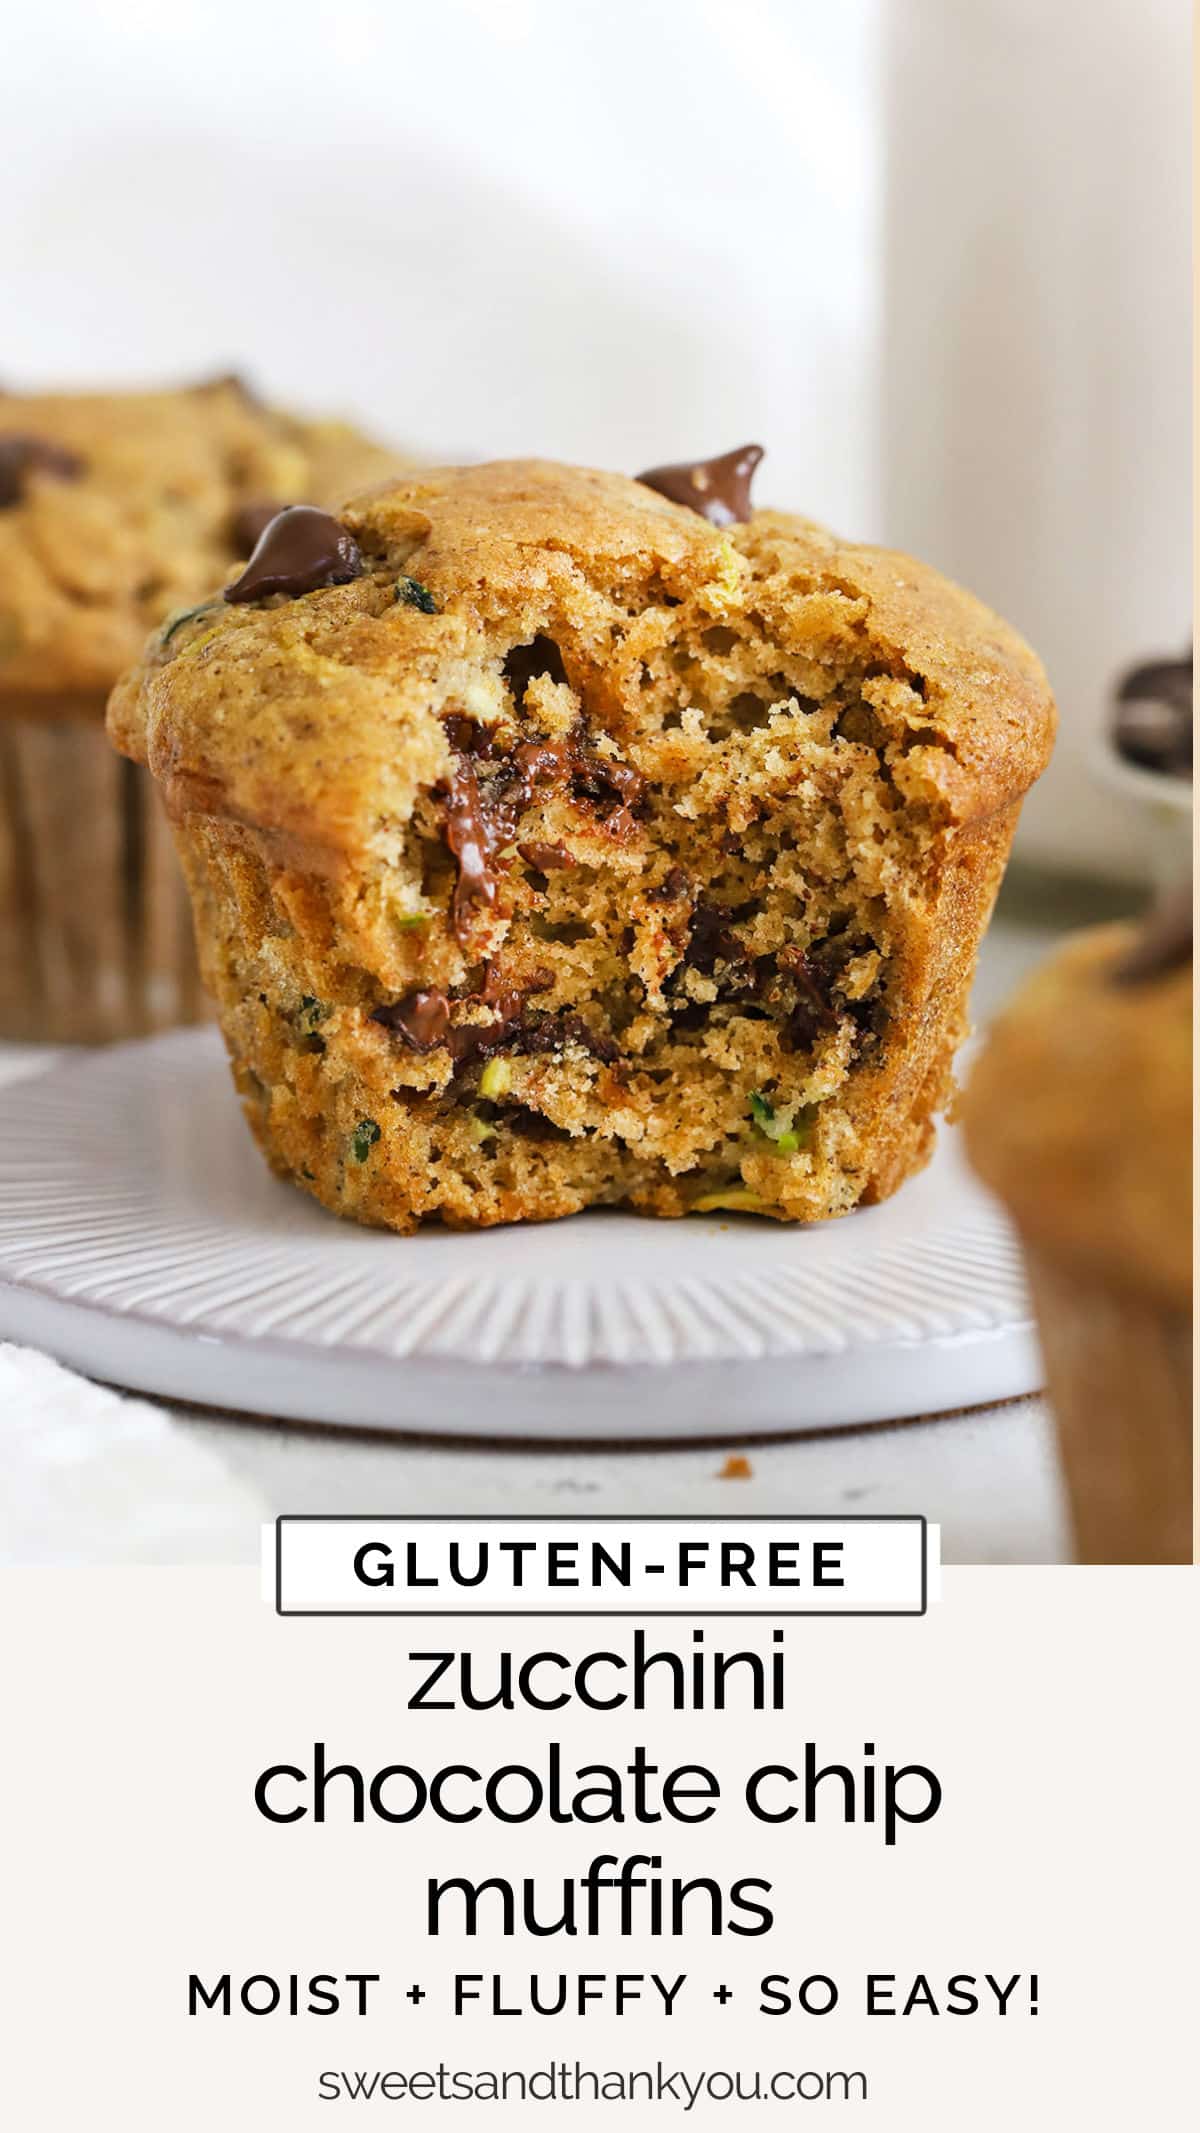 Gluten-Free Zucchini Chocolate Chip Muffins - These fluffy gluten-free zucchini muffins are loaded with chocolate chips & warm spices. The perfect way to use up that zucchini! // gluten-free zucchini muffin recipe // gluten-free zucchini bread muffins // gluten-free chocolate chip zucchini muffins recipe // brown butter zucchini muffins // moist gluten-free zucchini muffins // easy gluten-free zucchini muffins // fluffy gluten-free zucchini muffins // chocolate chip zucchini muffin